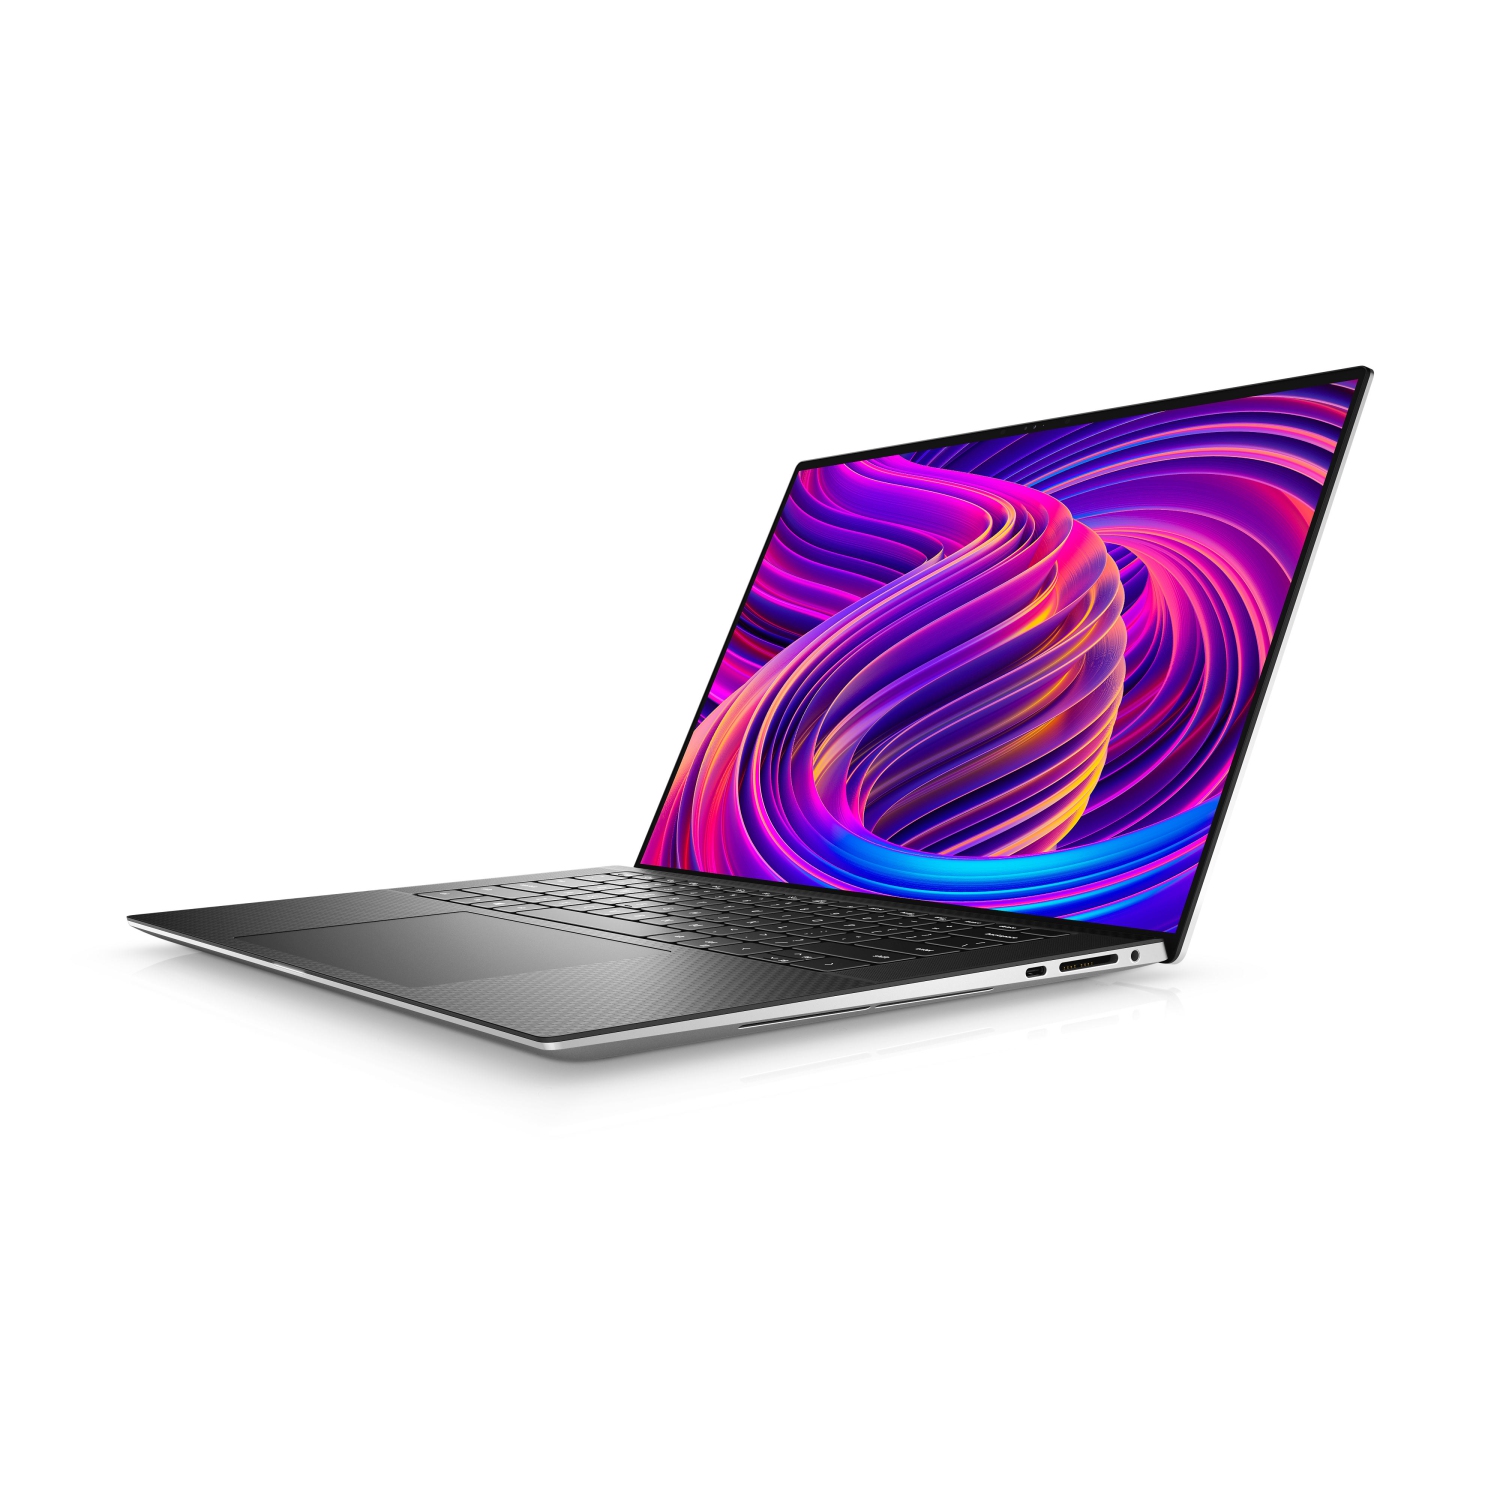 Refurbished (Excellent) - Dell XPS 15 9510 Laptop (2021), 15.6" 4K Touch, Core i9 - 4TB SSD - 32GB RAM - 3050 Ti, 8 Cores @ 4.9 GHz - 11th Gen CPU Certified Refurbished